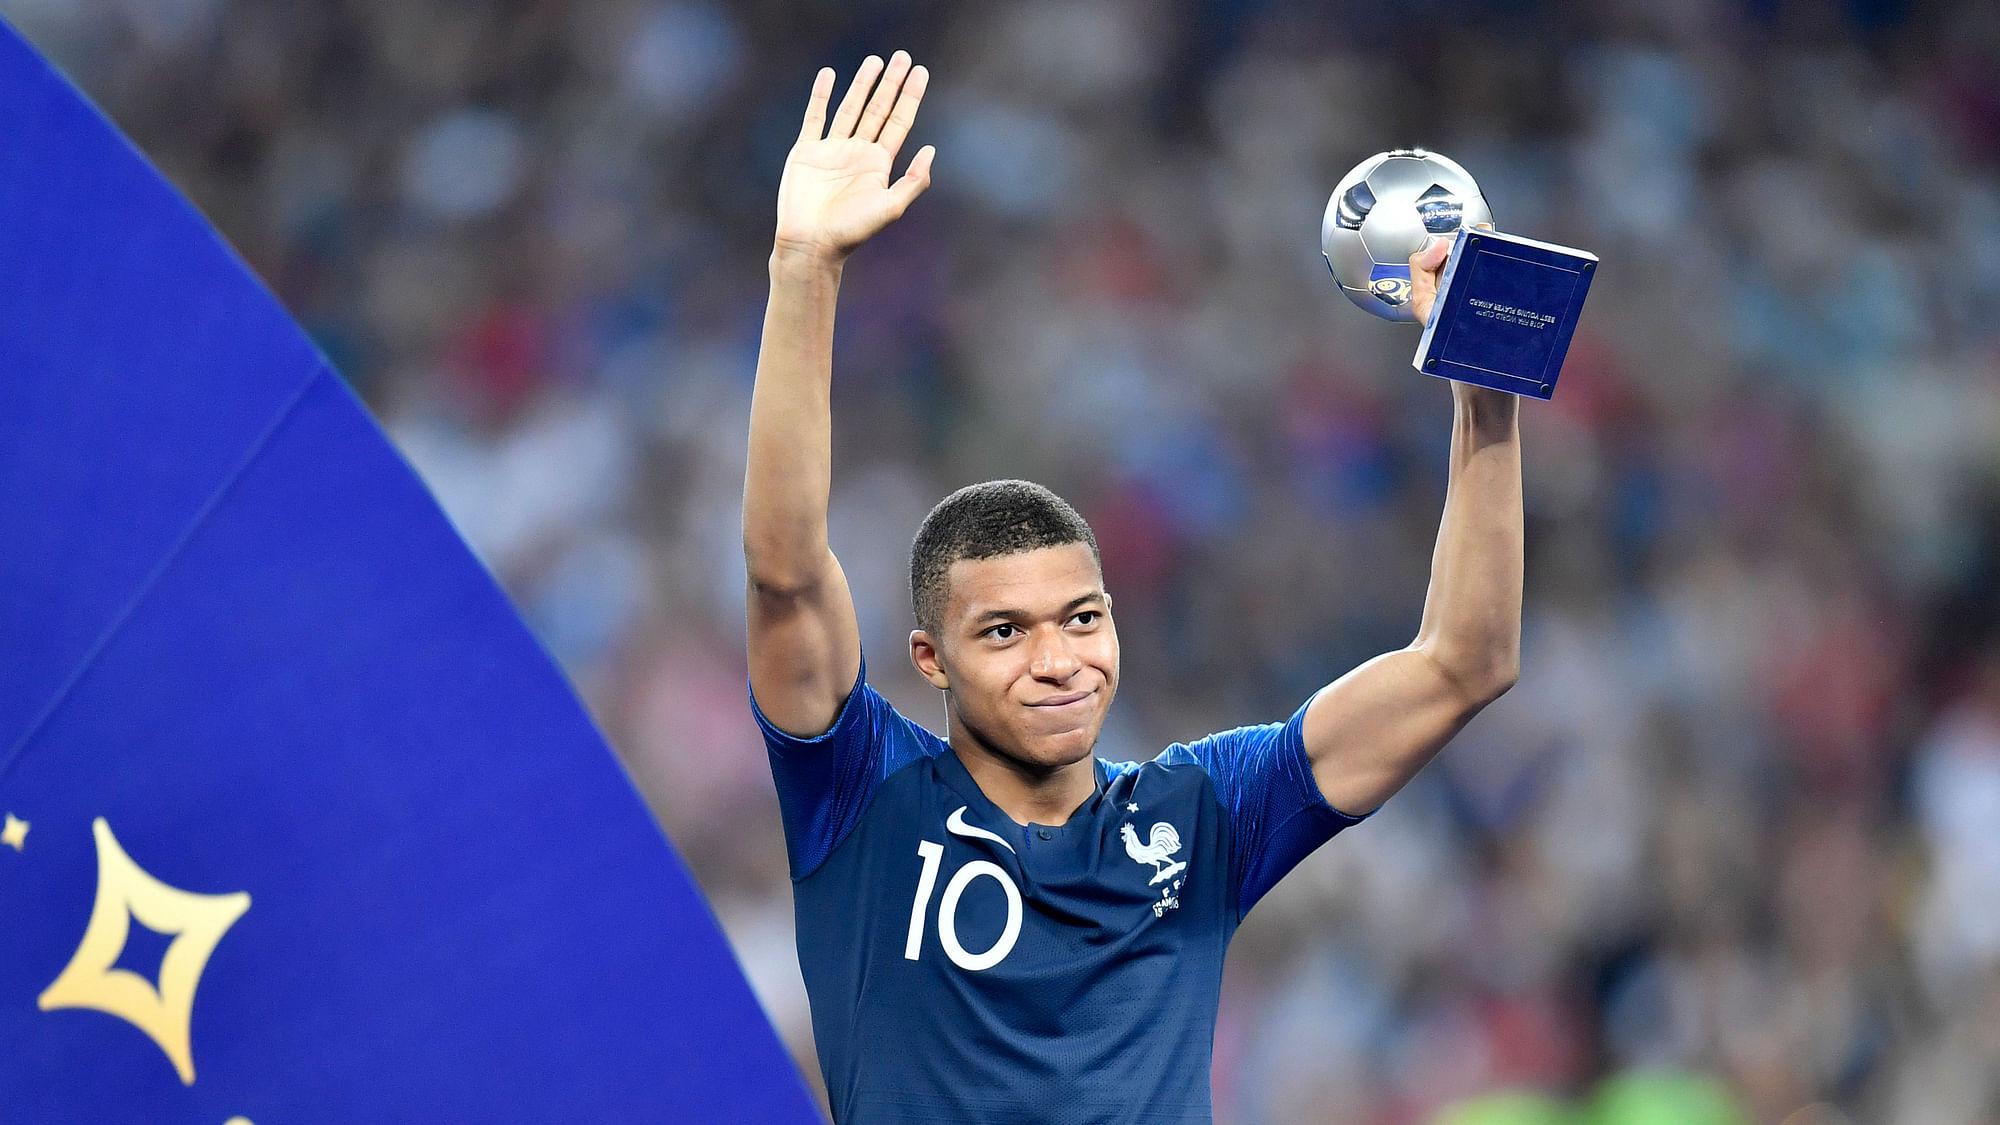 France’s Kylian Mbappe, who became the youngest player to score two goals in a World Cup game.